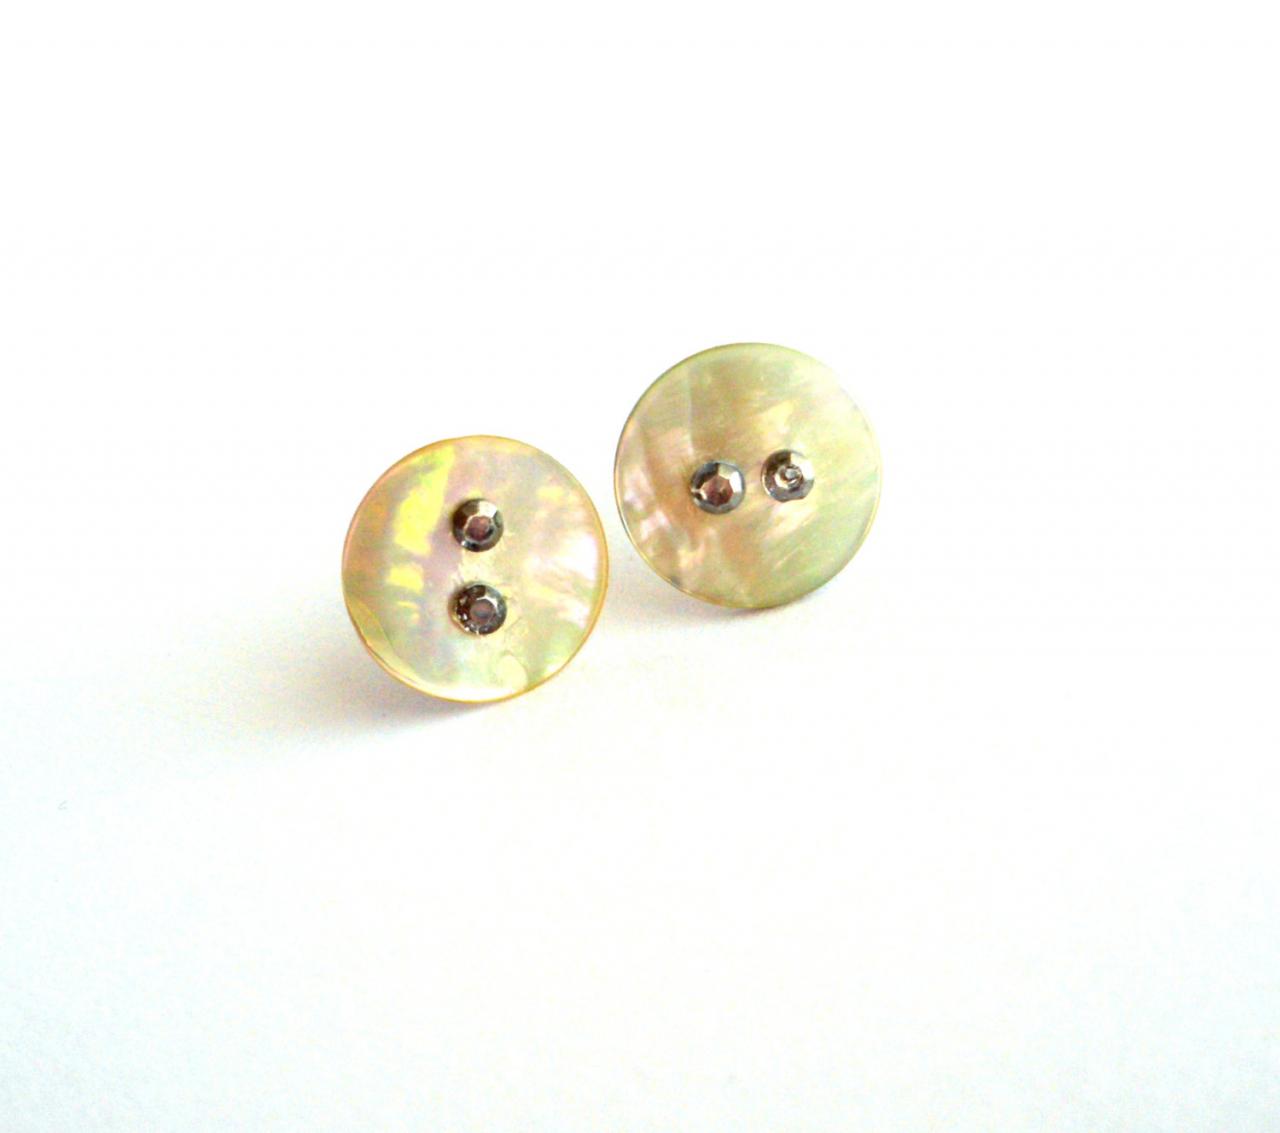 Pearl White Post Earrings Made Of Vintage Buttons Mother-of-pearl And Shiny Rhinestones, Upcycled Jewelry, Ecofriendly, Repurposed